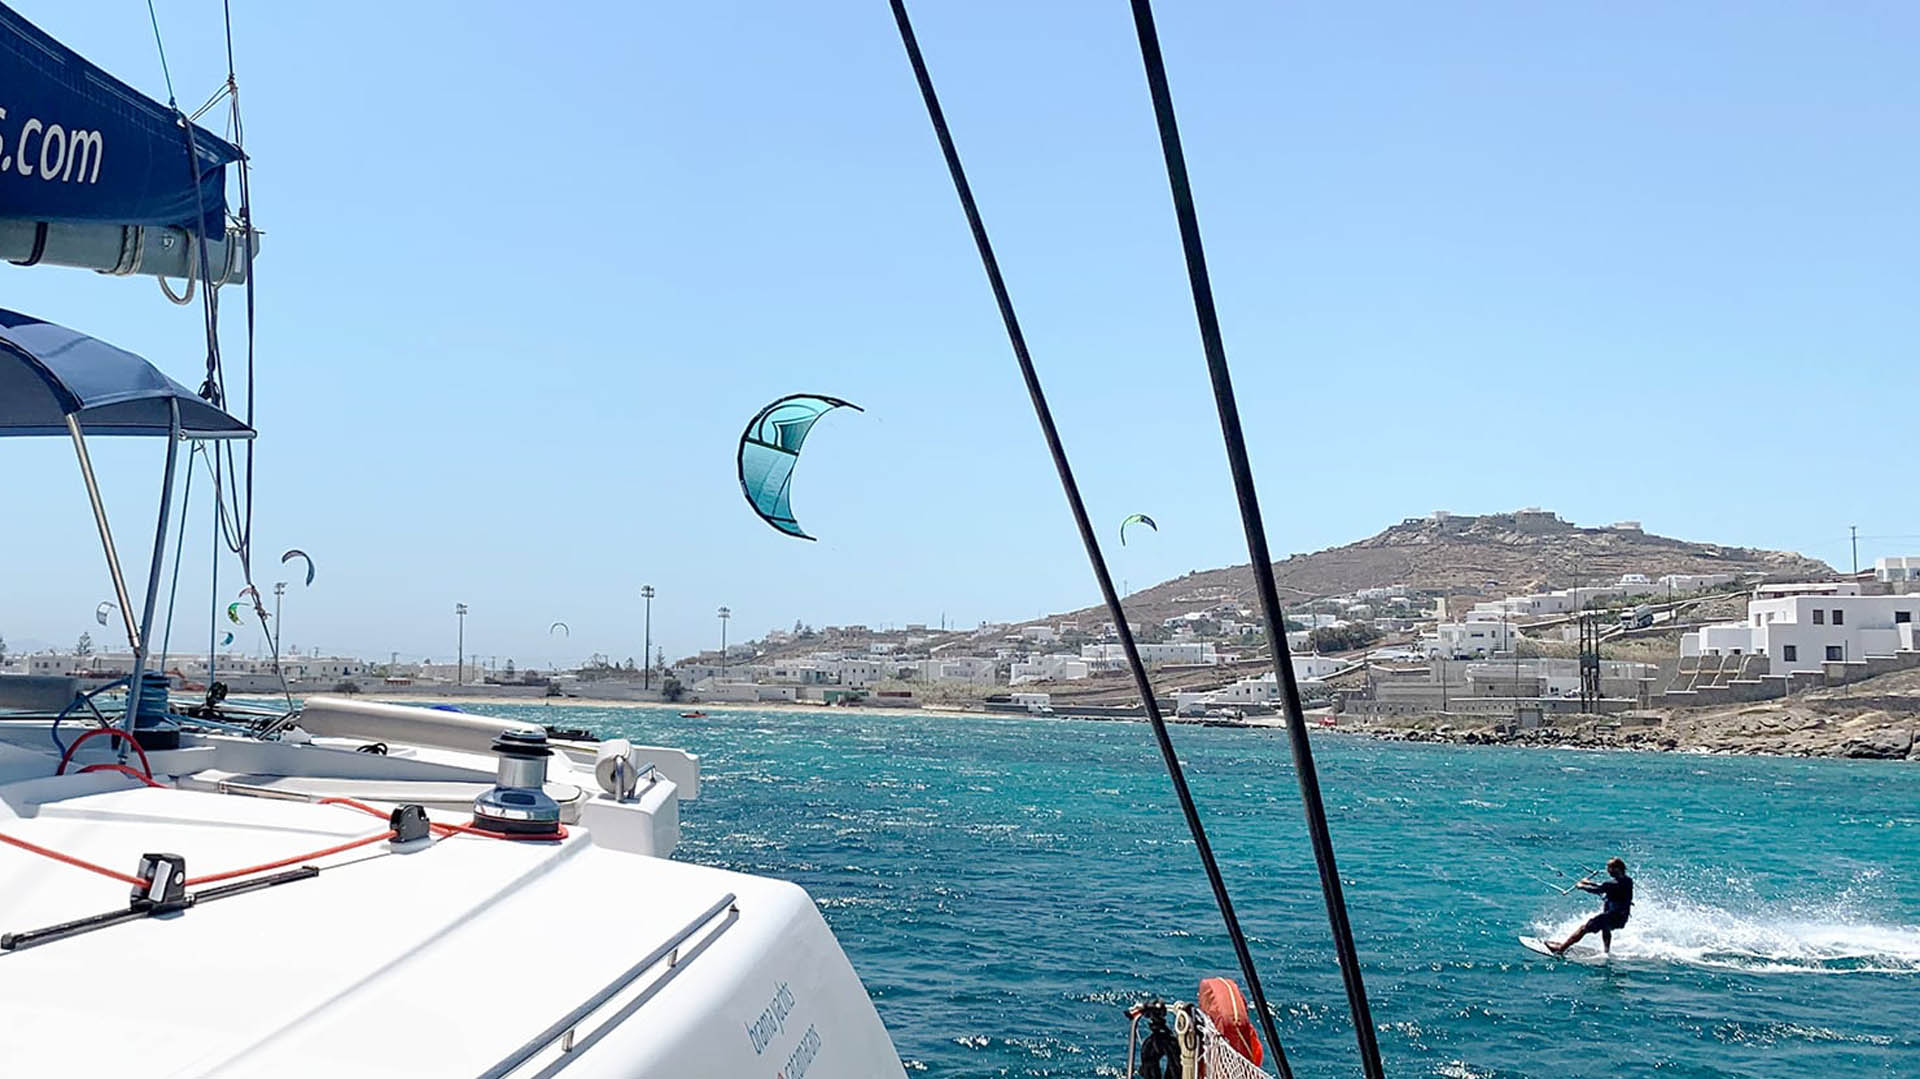            GET ON BOARD!                    discover new kitesurfing playgrounds       